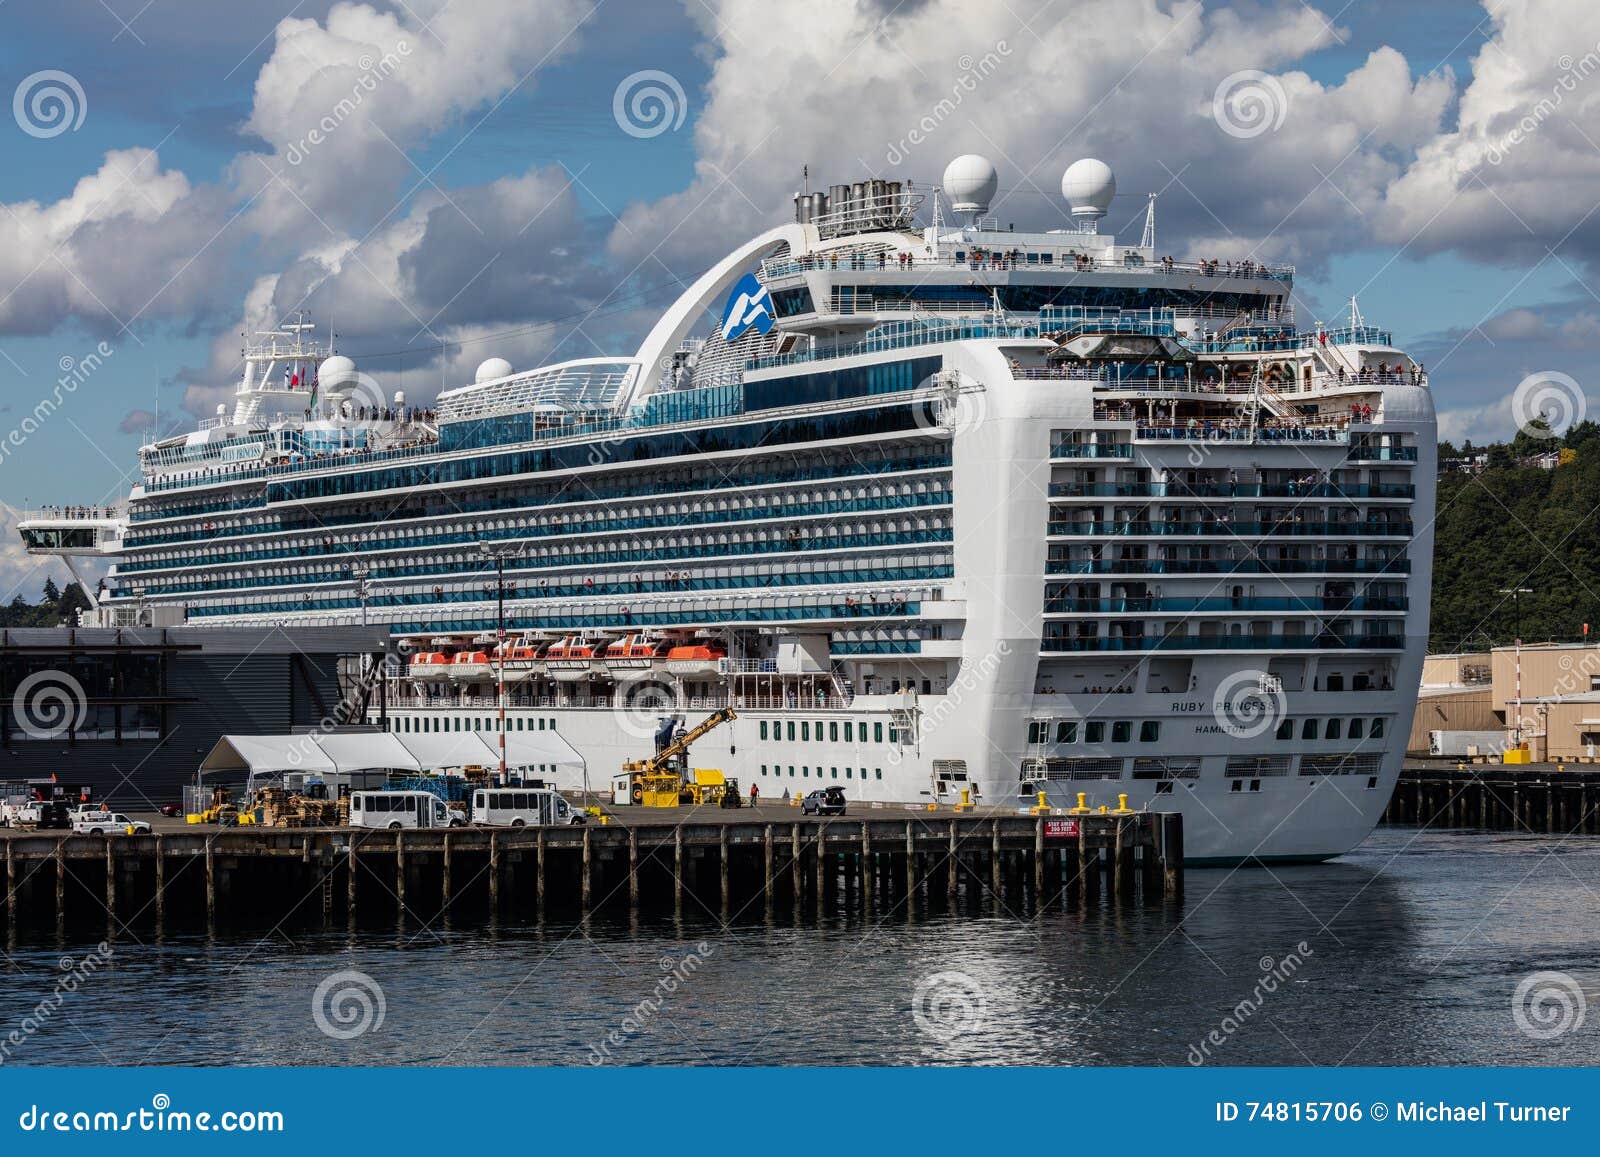 cruise ship docked in seattle